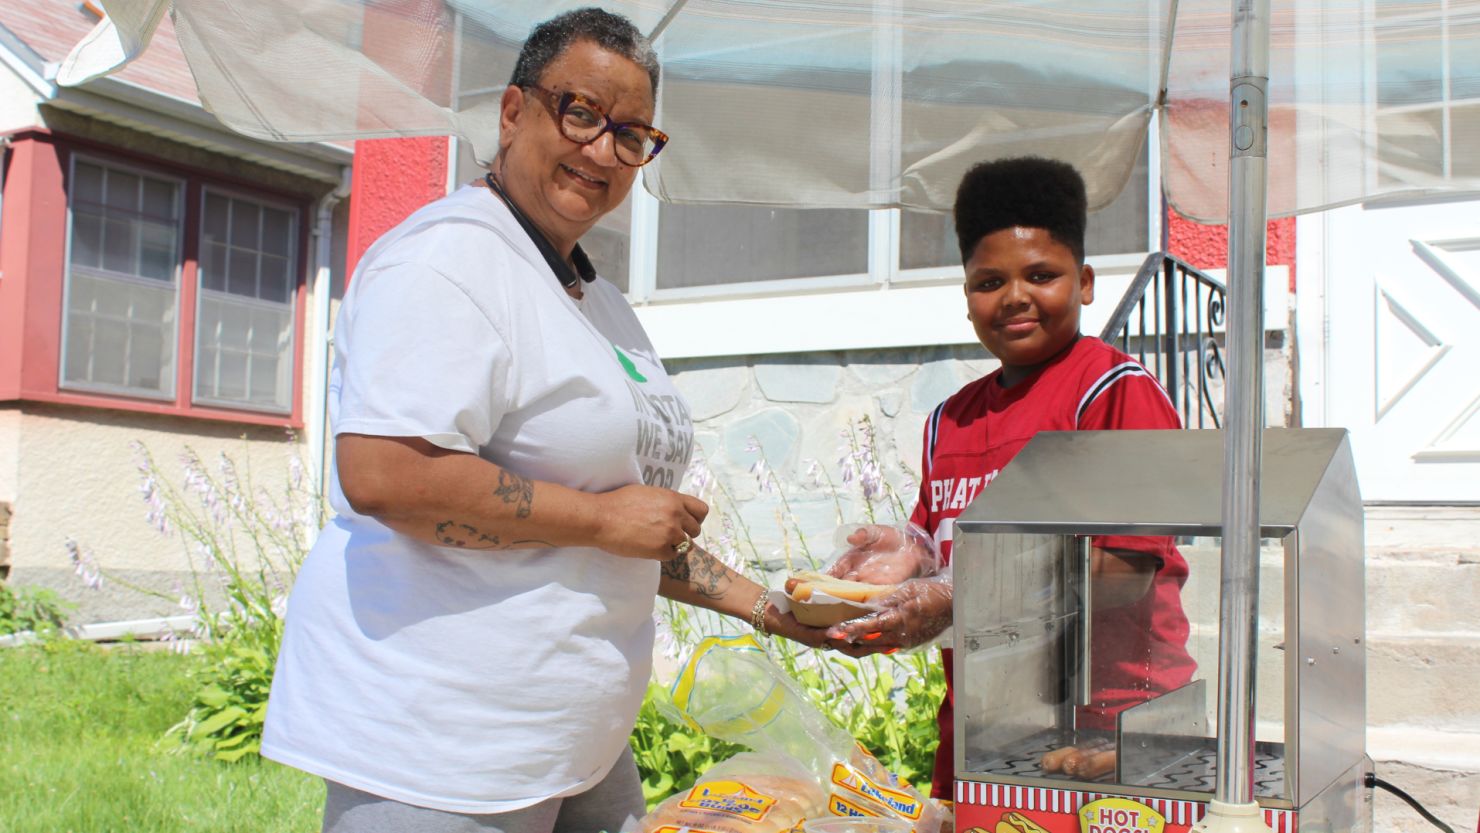 Jaequan Faulkner is the proud owner of his own hot dog stand, with the city's help.